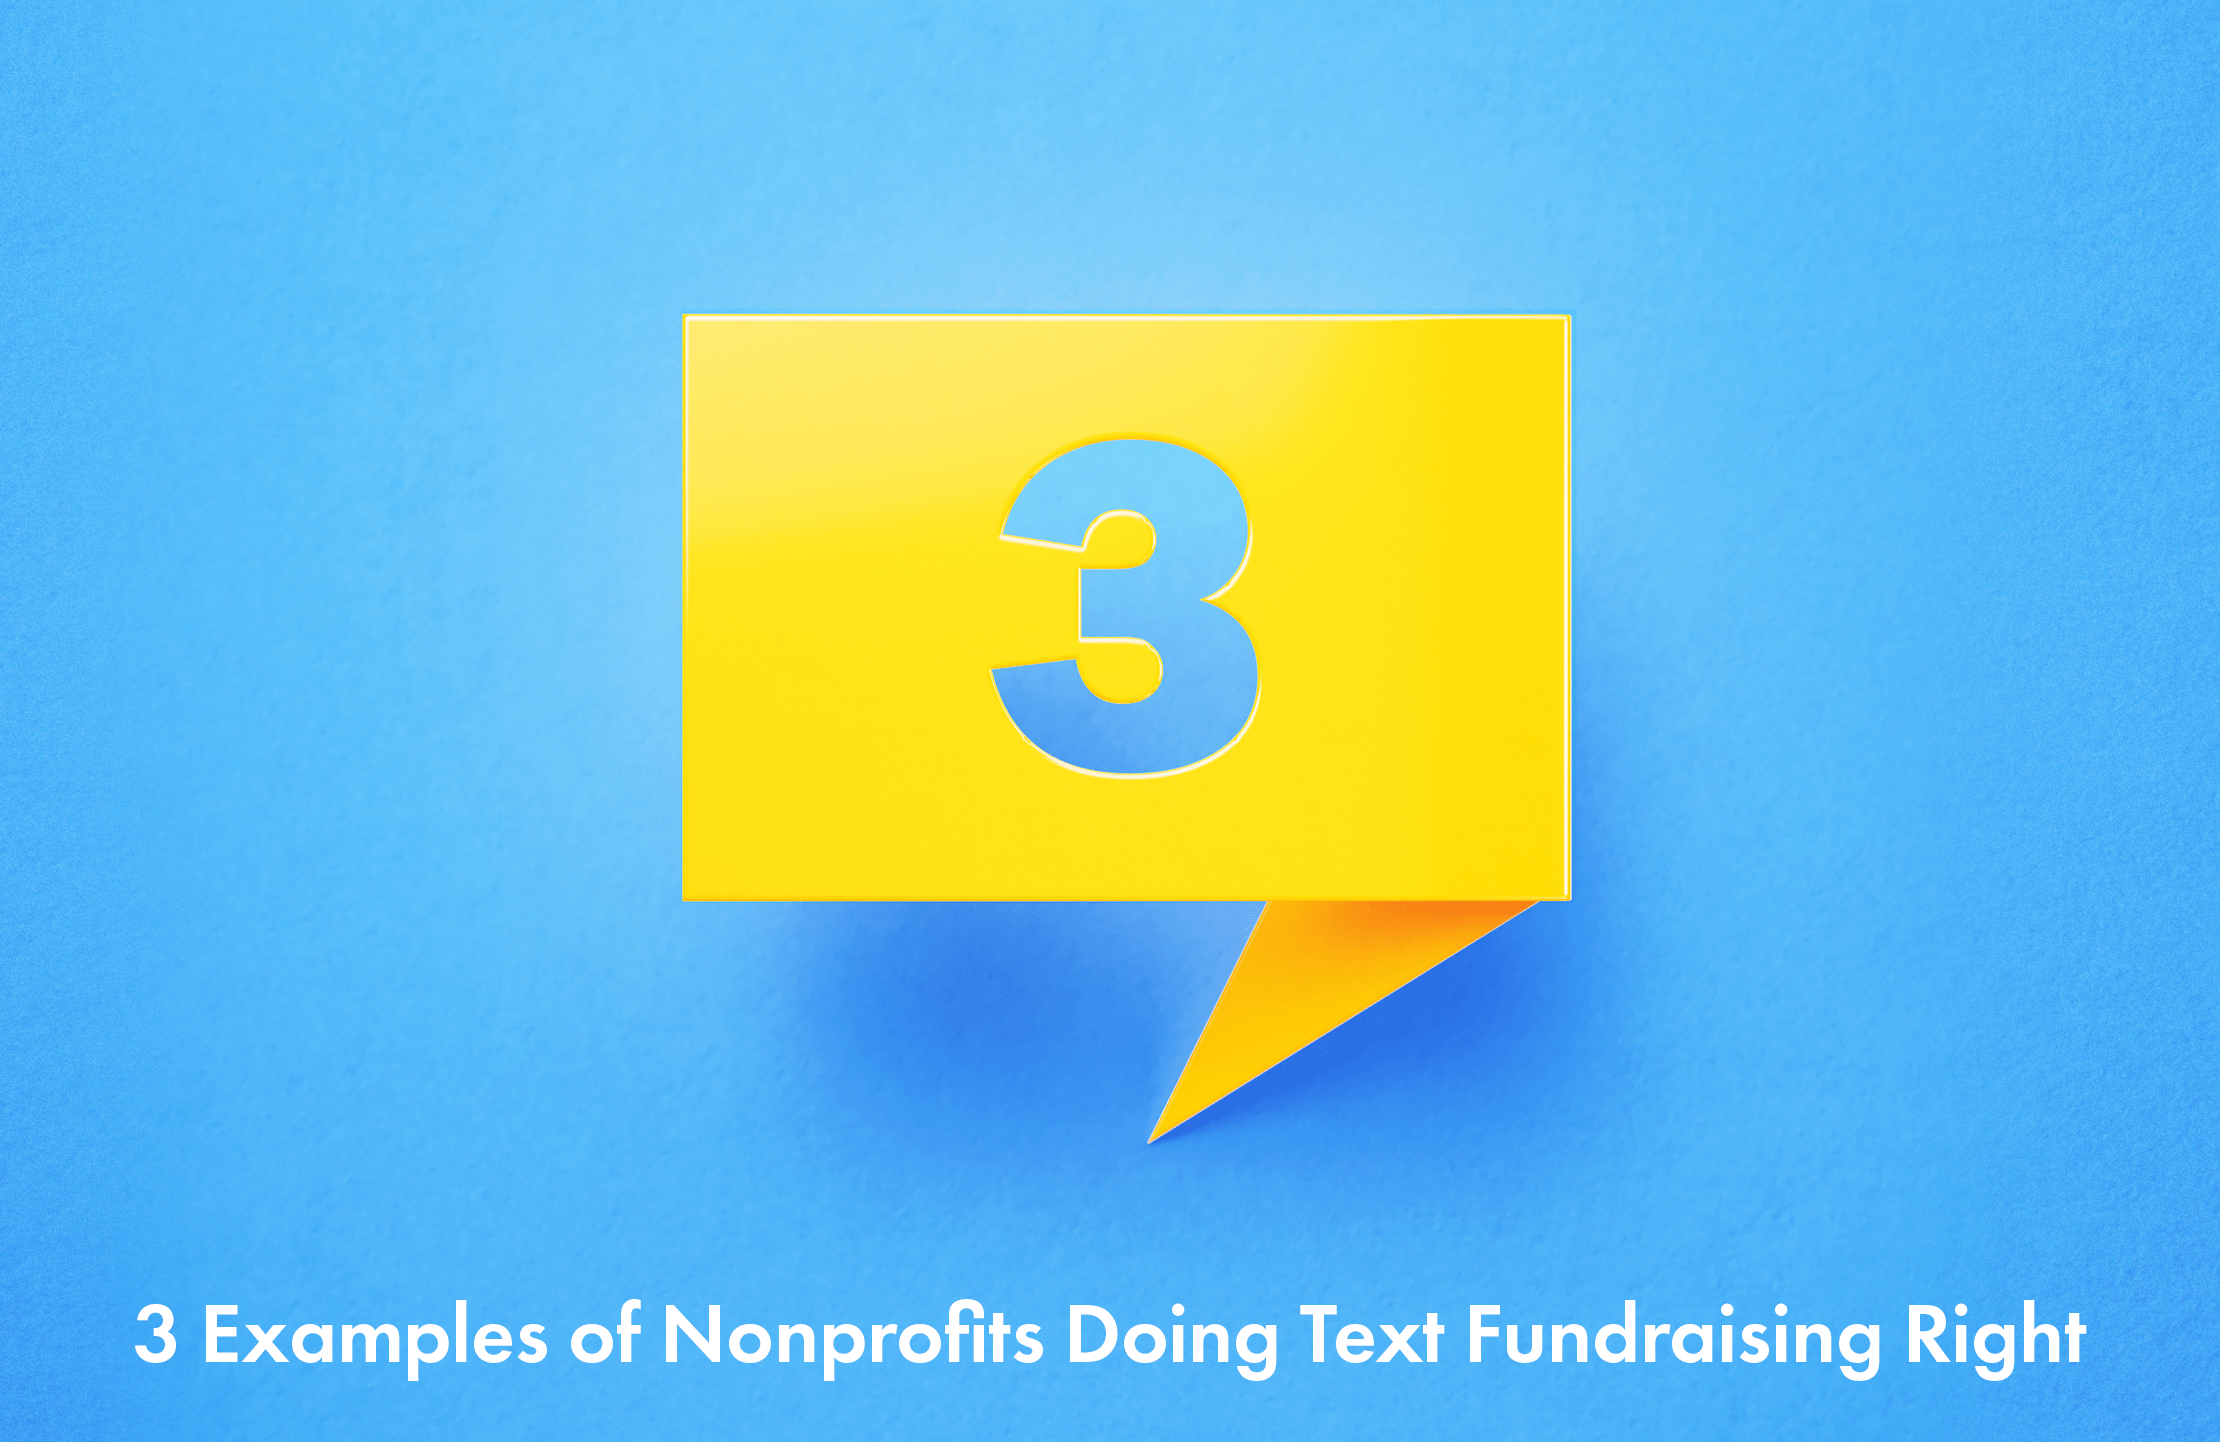 3 Examples of Nonprofits Doing Text Fundraising Right